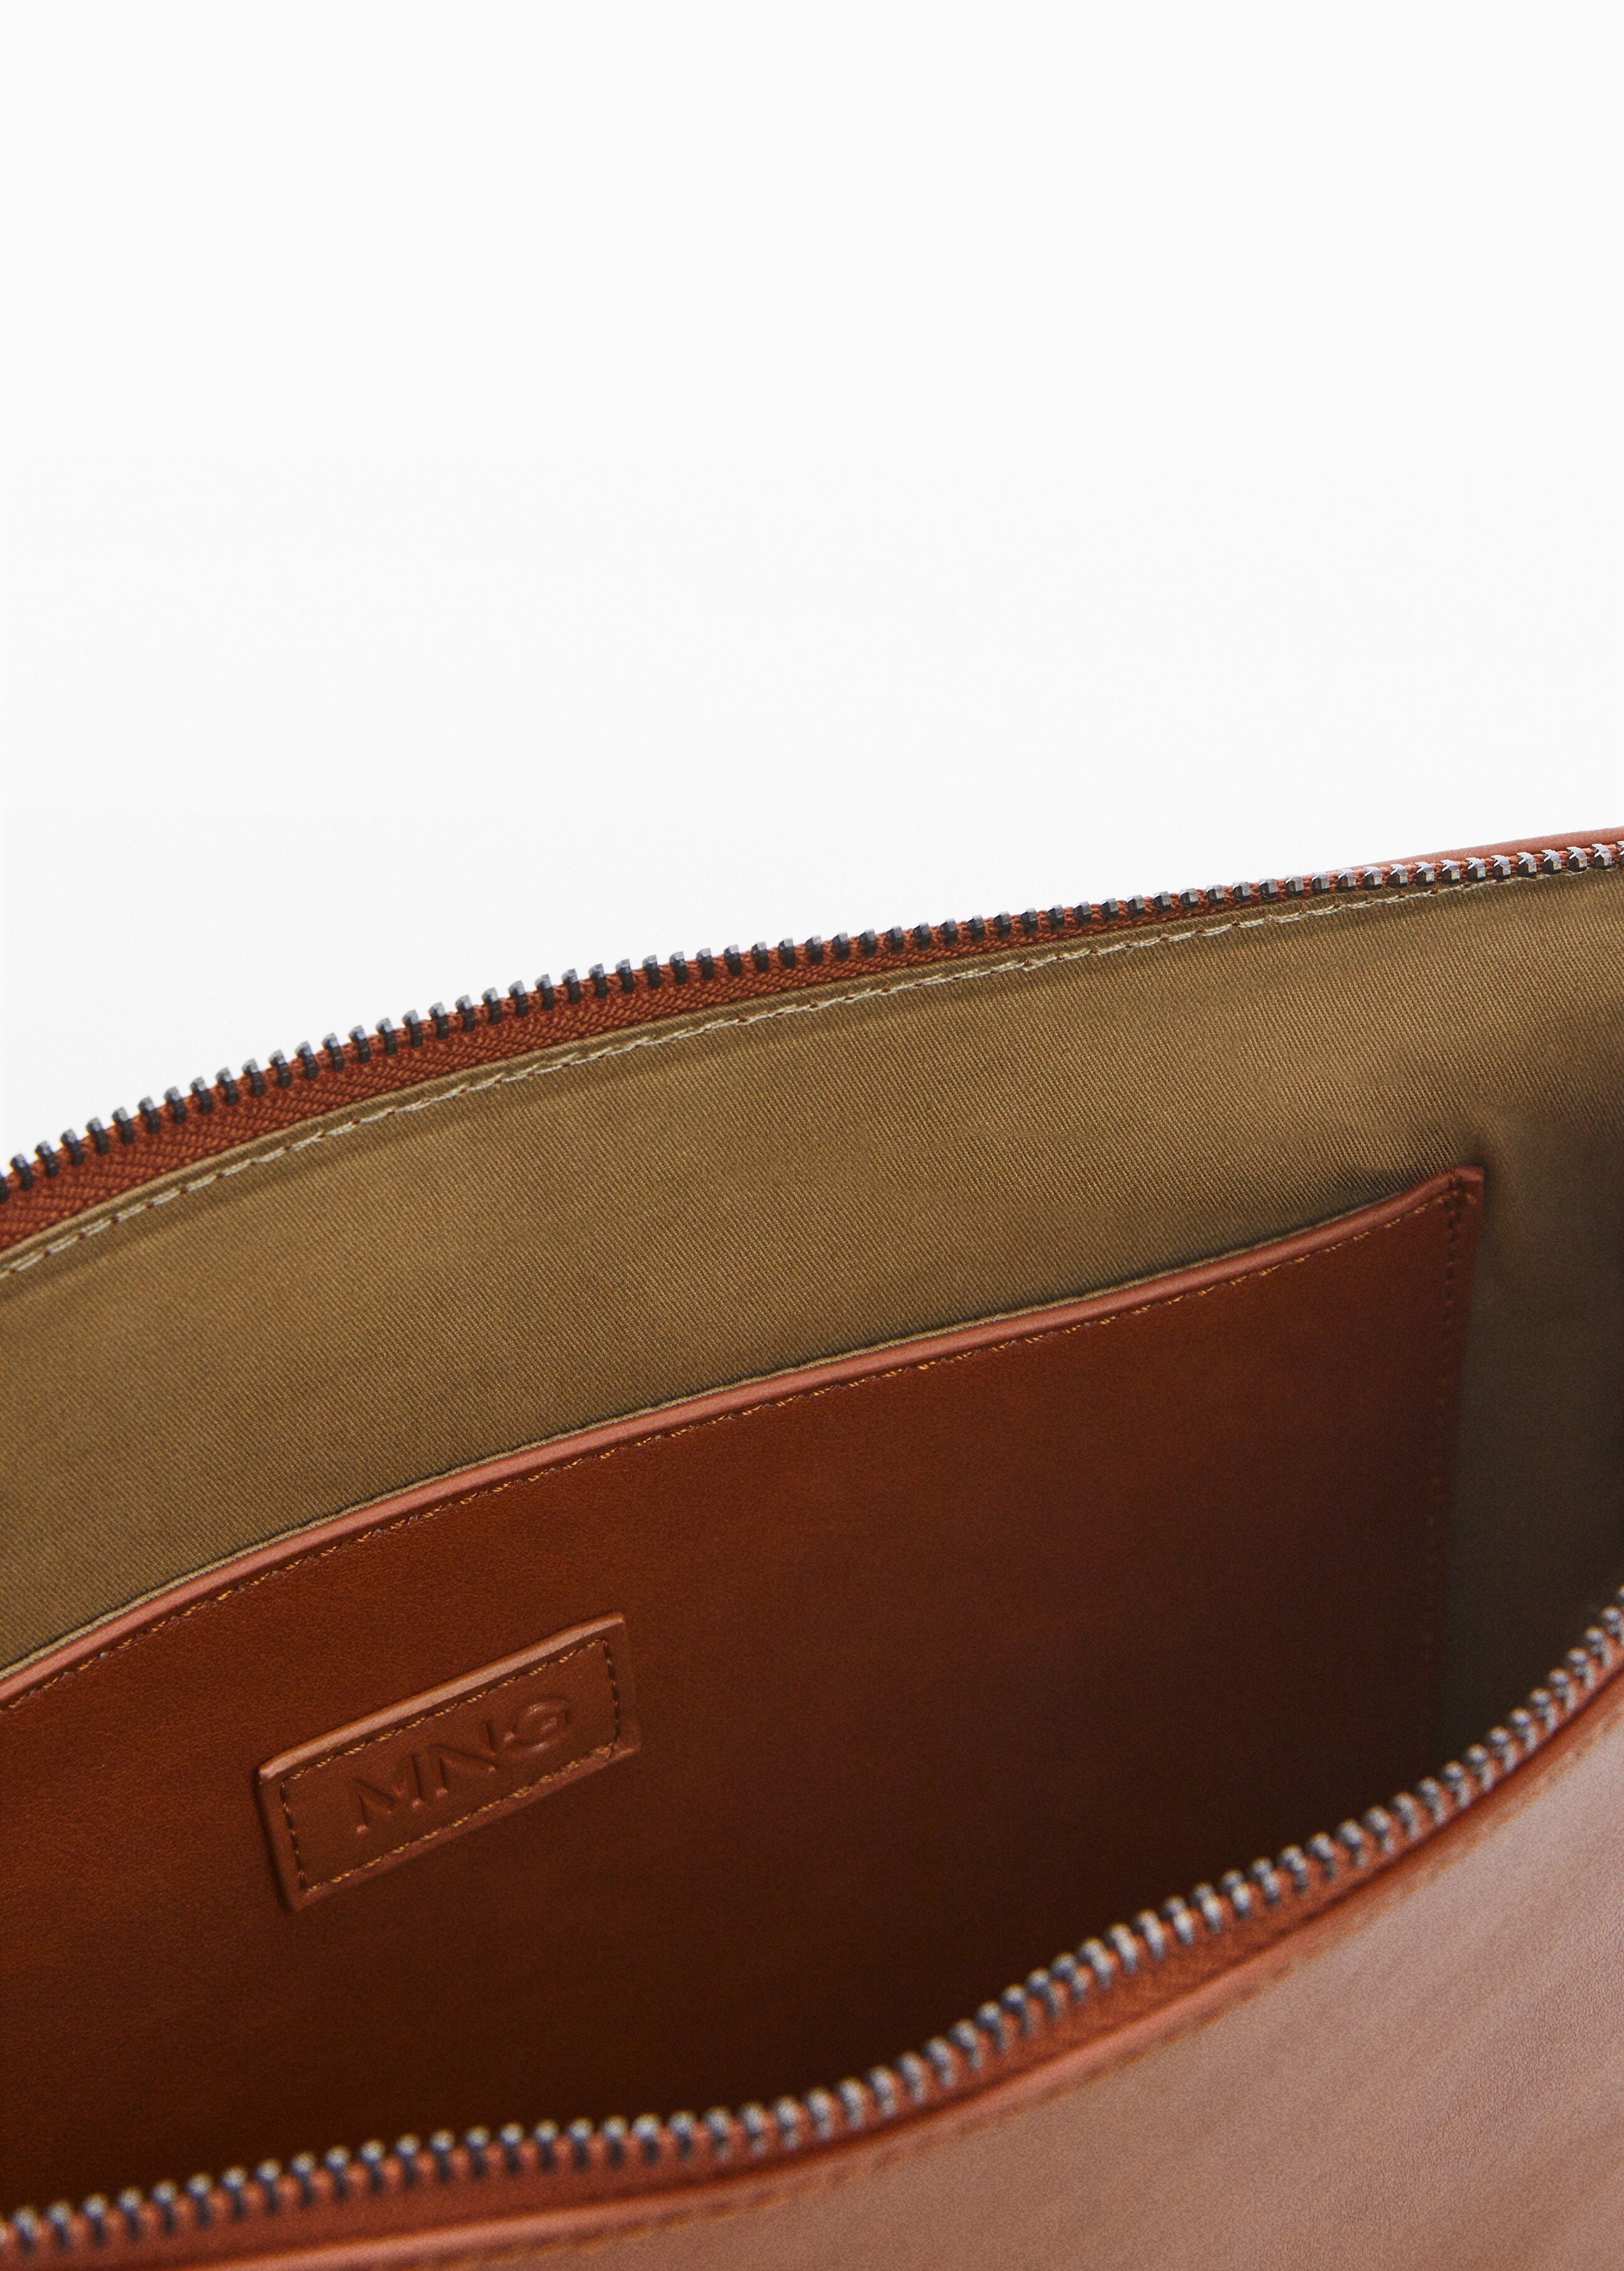 Leather laptop case - Details of the article 2